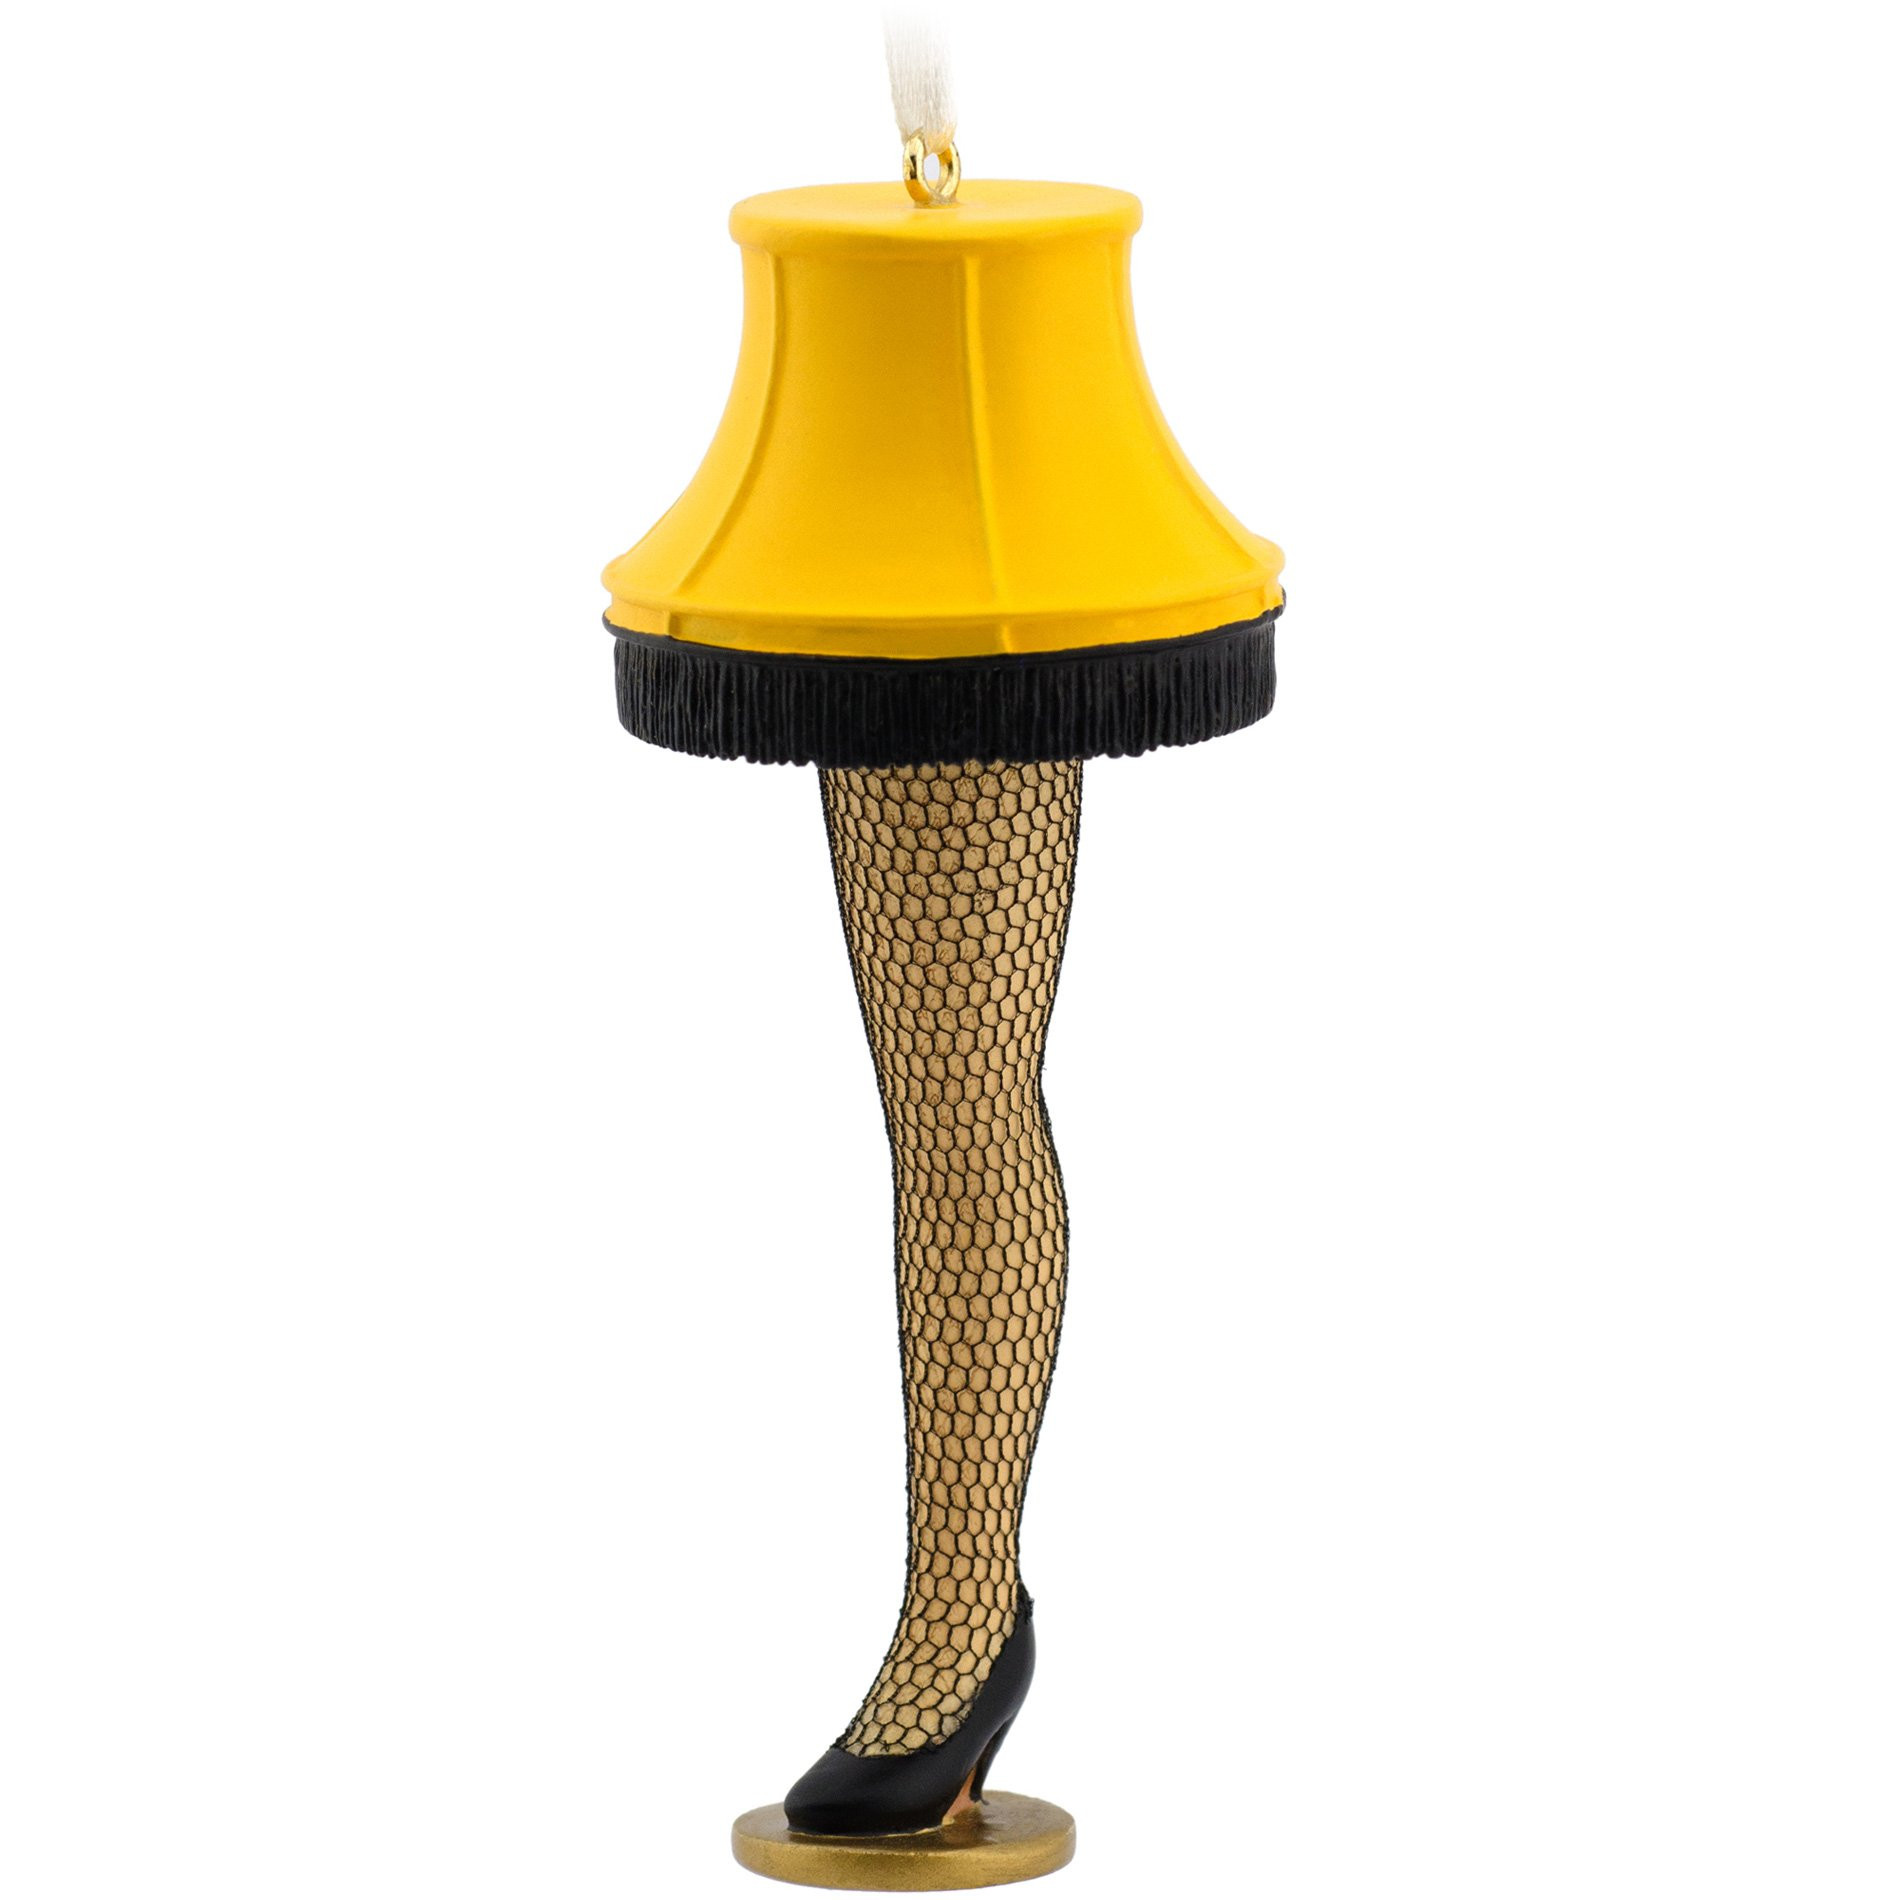 Christmas Story Leg Lamp Ornament
 Channel a hilarious moment from your favorite holiday